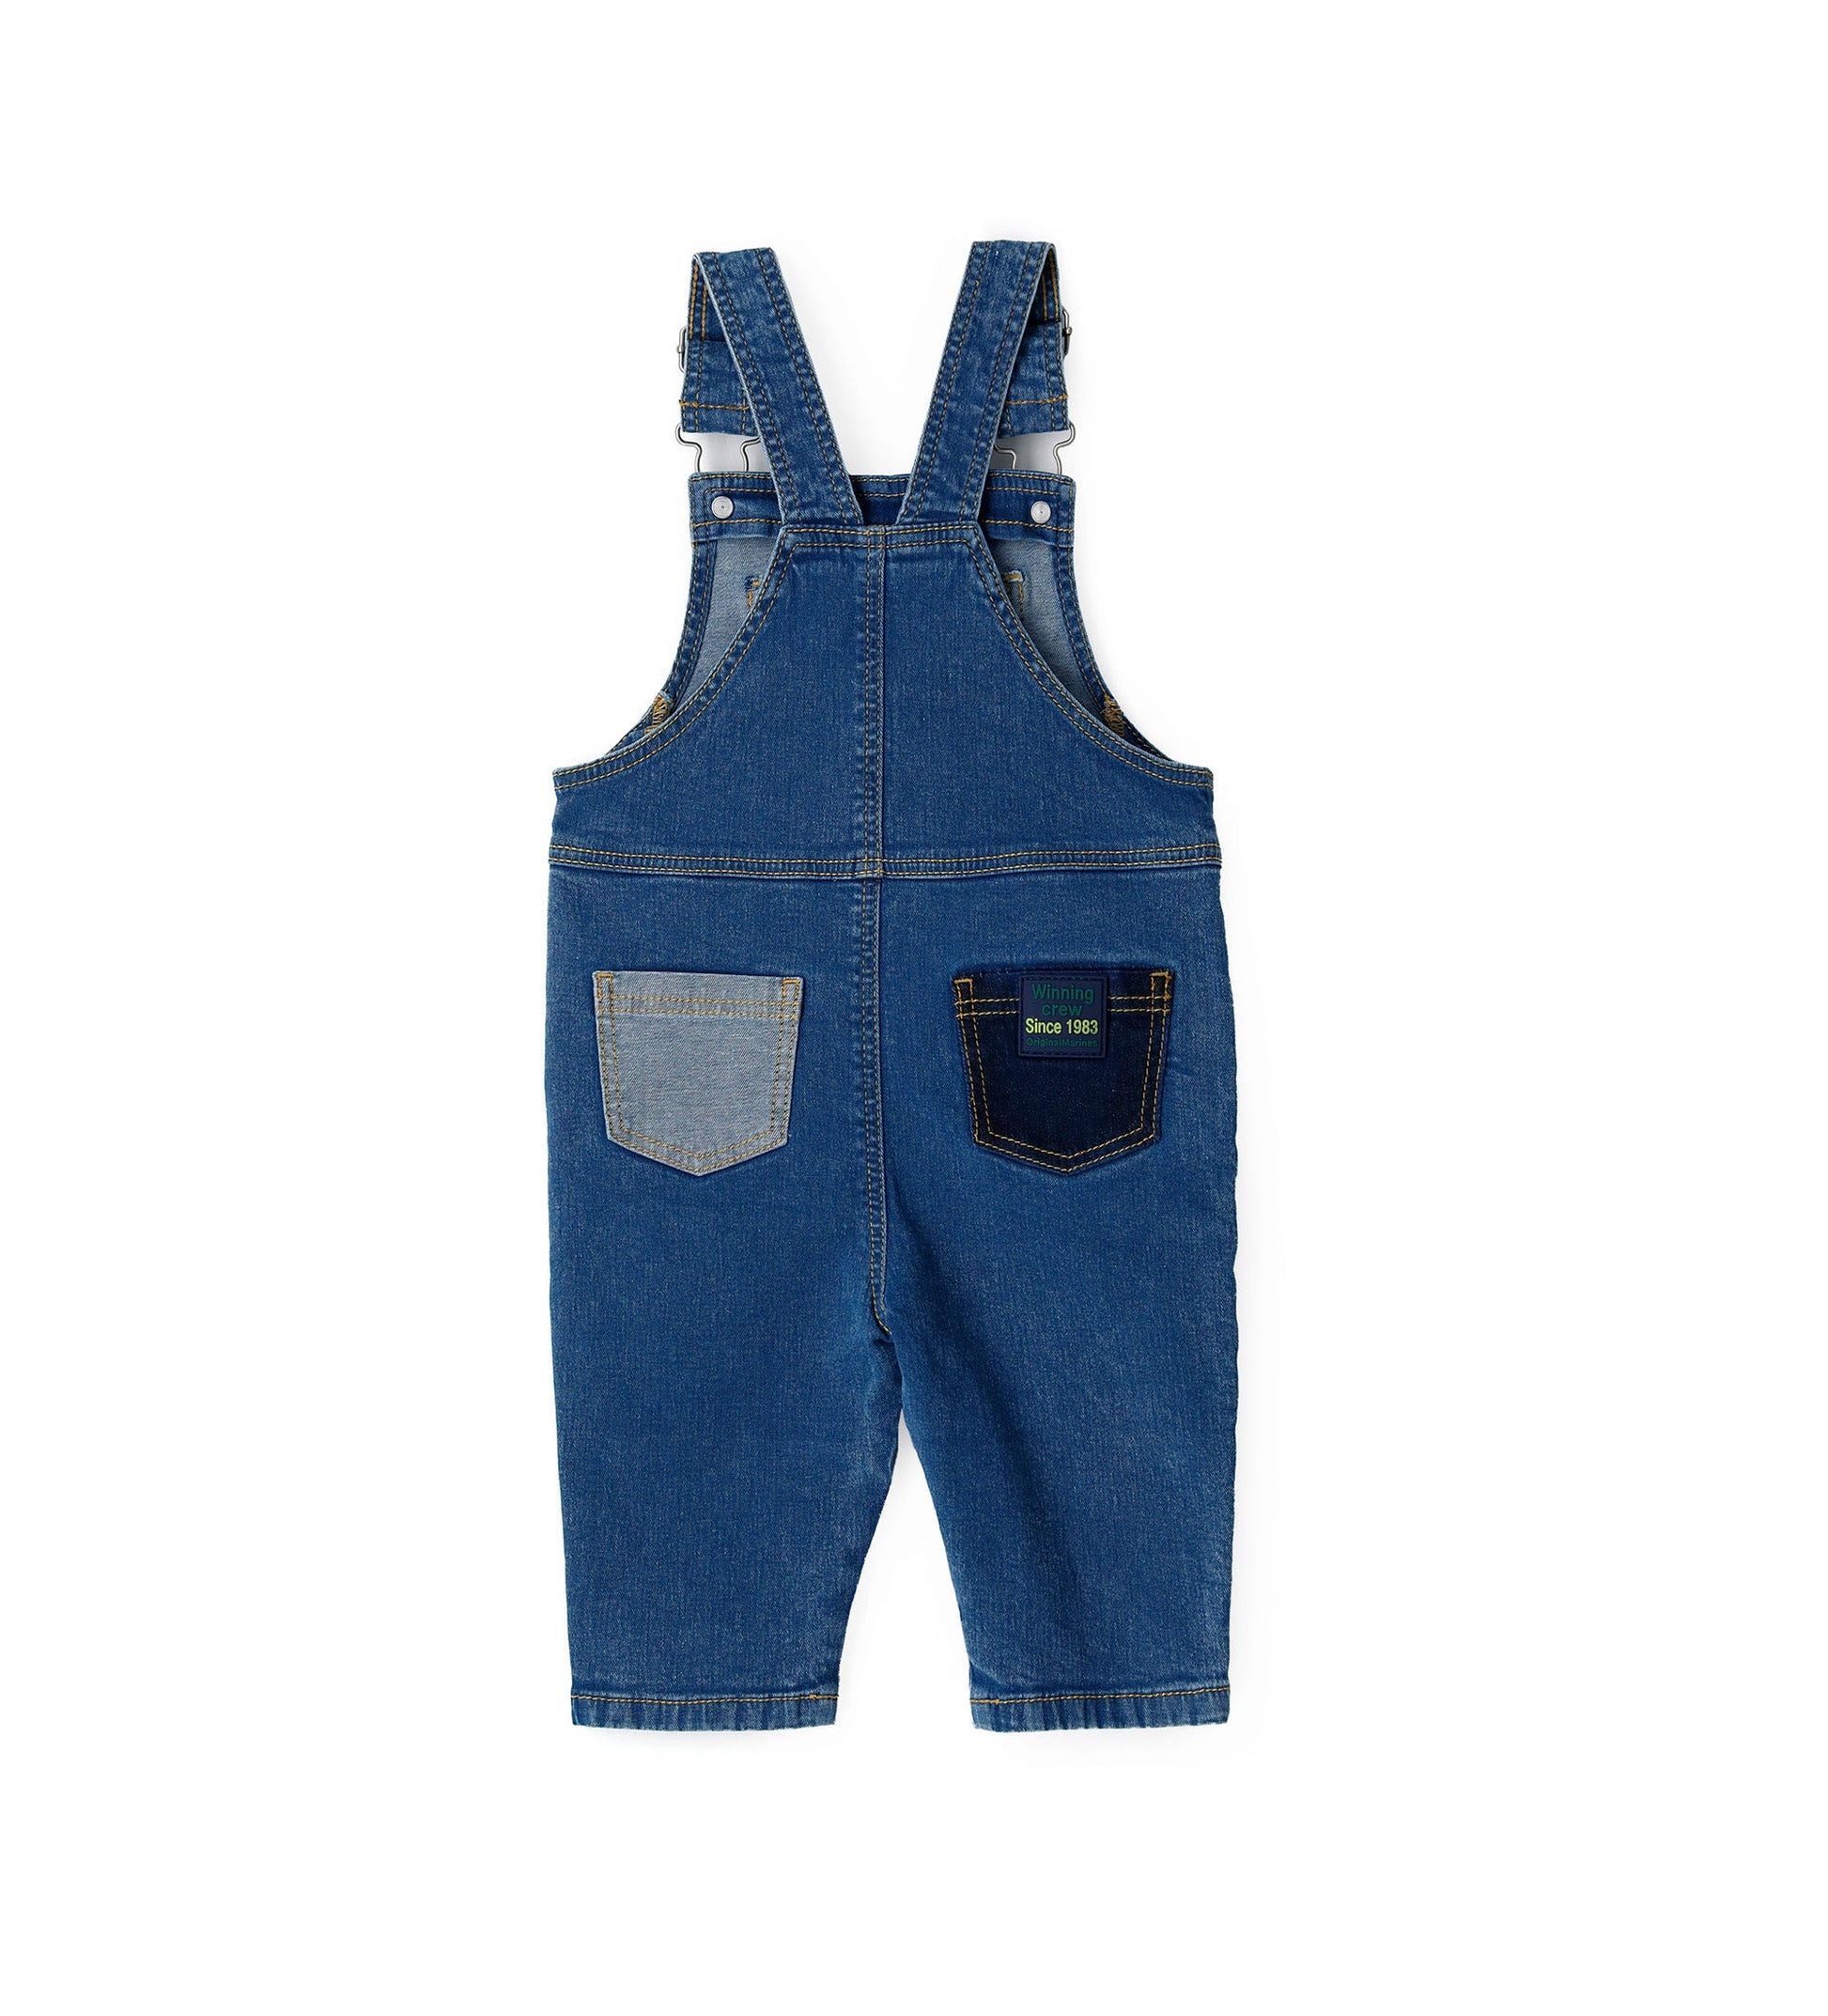 BABY BOY'S DUNGAREES-12